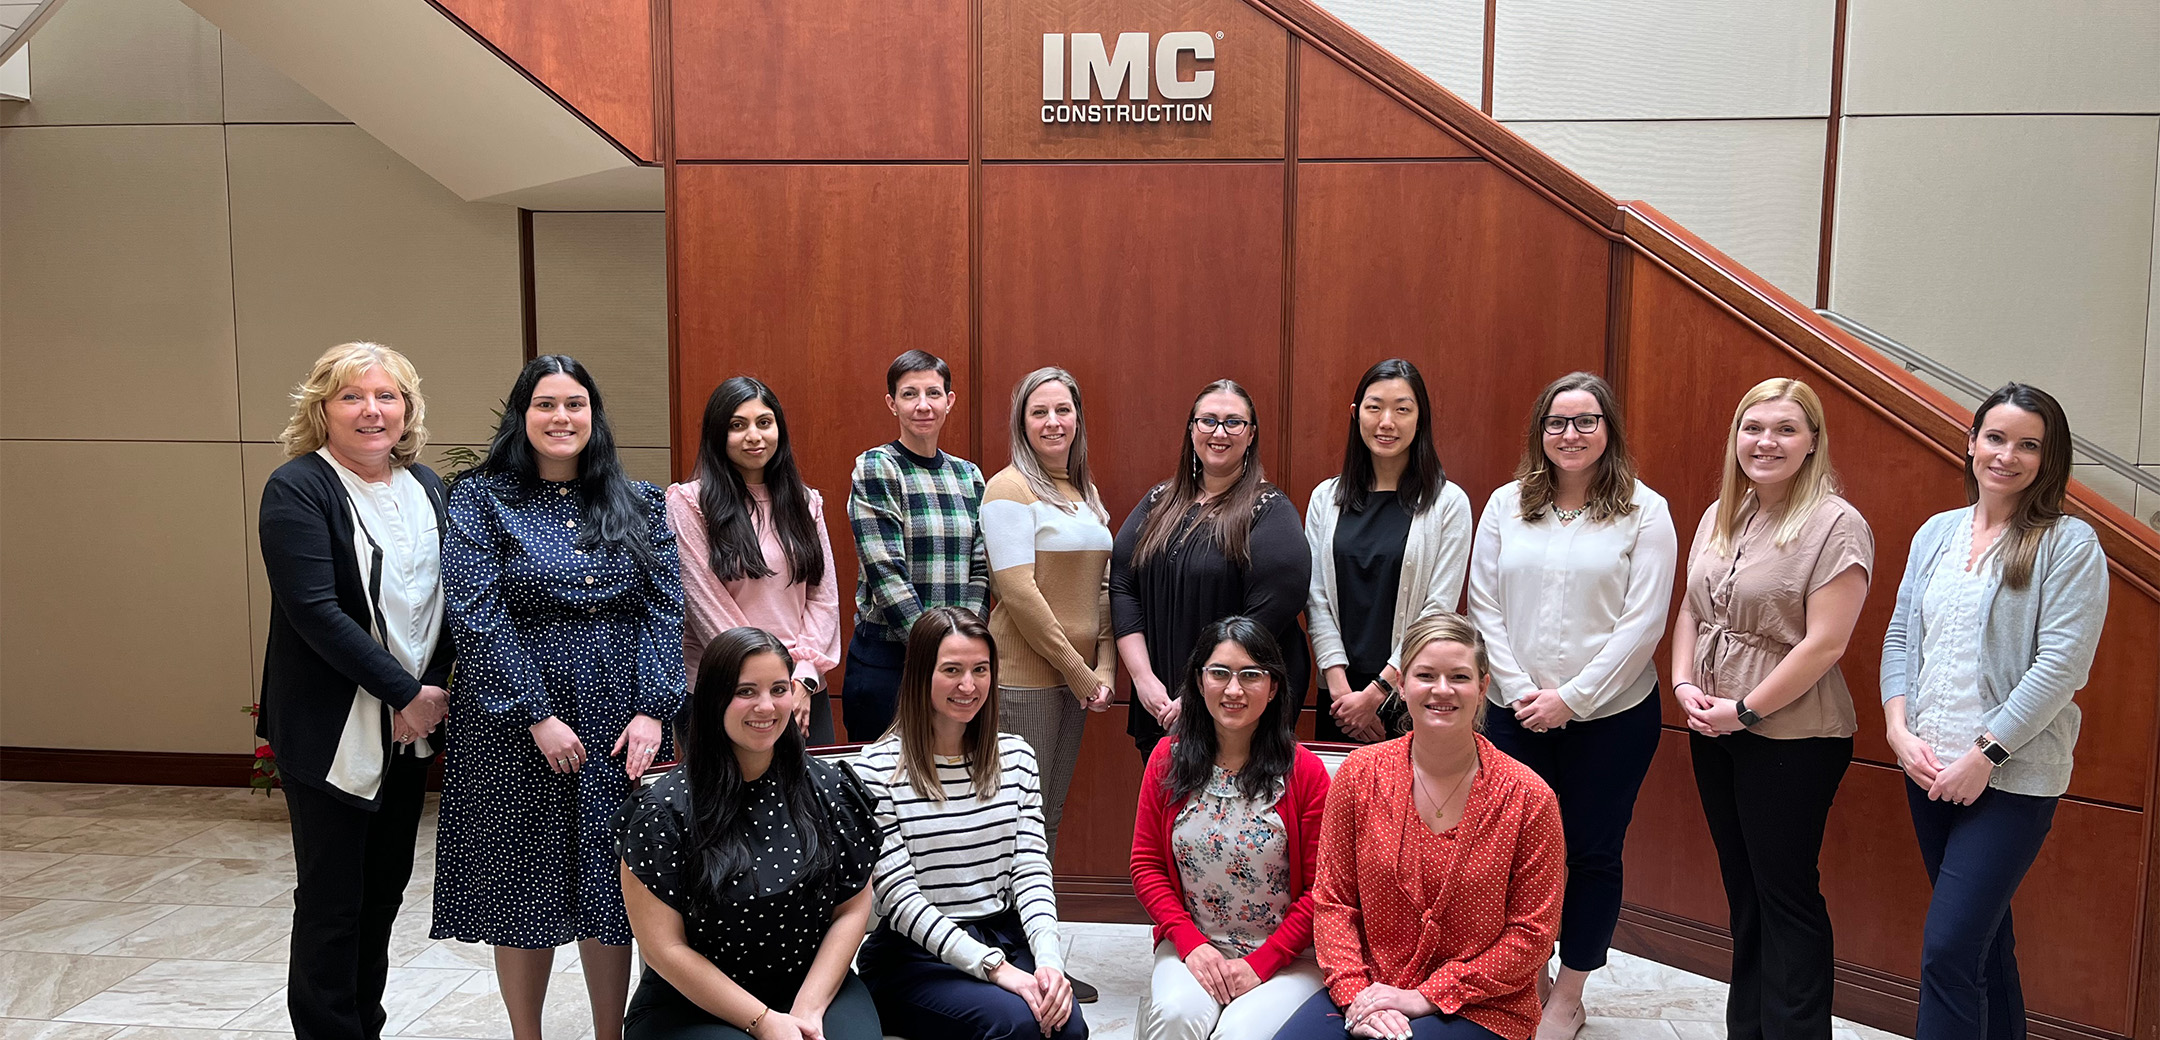 A group of women posing for a group photo in front of the IMC Construction Malvern office lobby